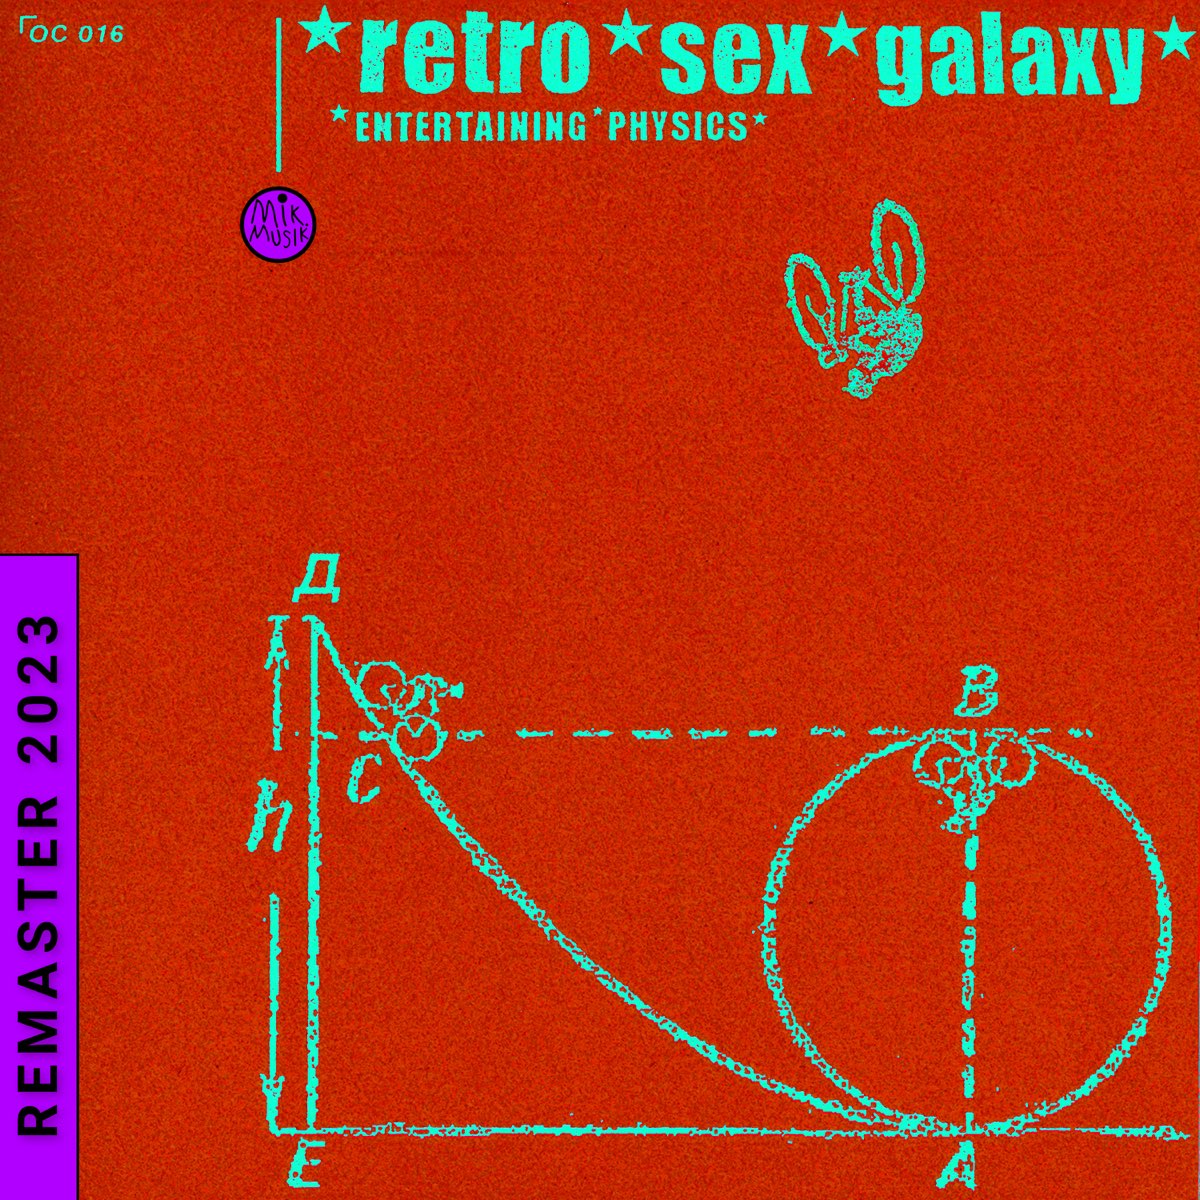 ‎the Fox And The Compasses Remaster 2023 Single By Retro Sex Galaxy And Wojciech Kucharczyk On